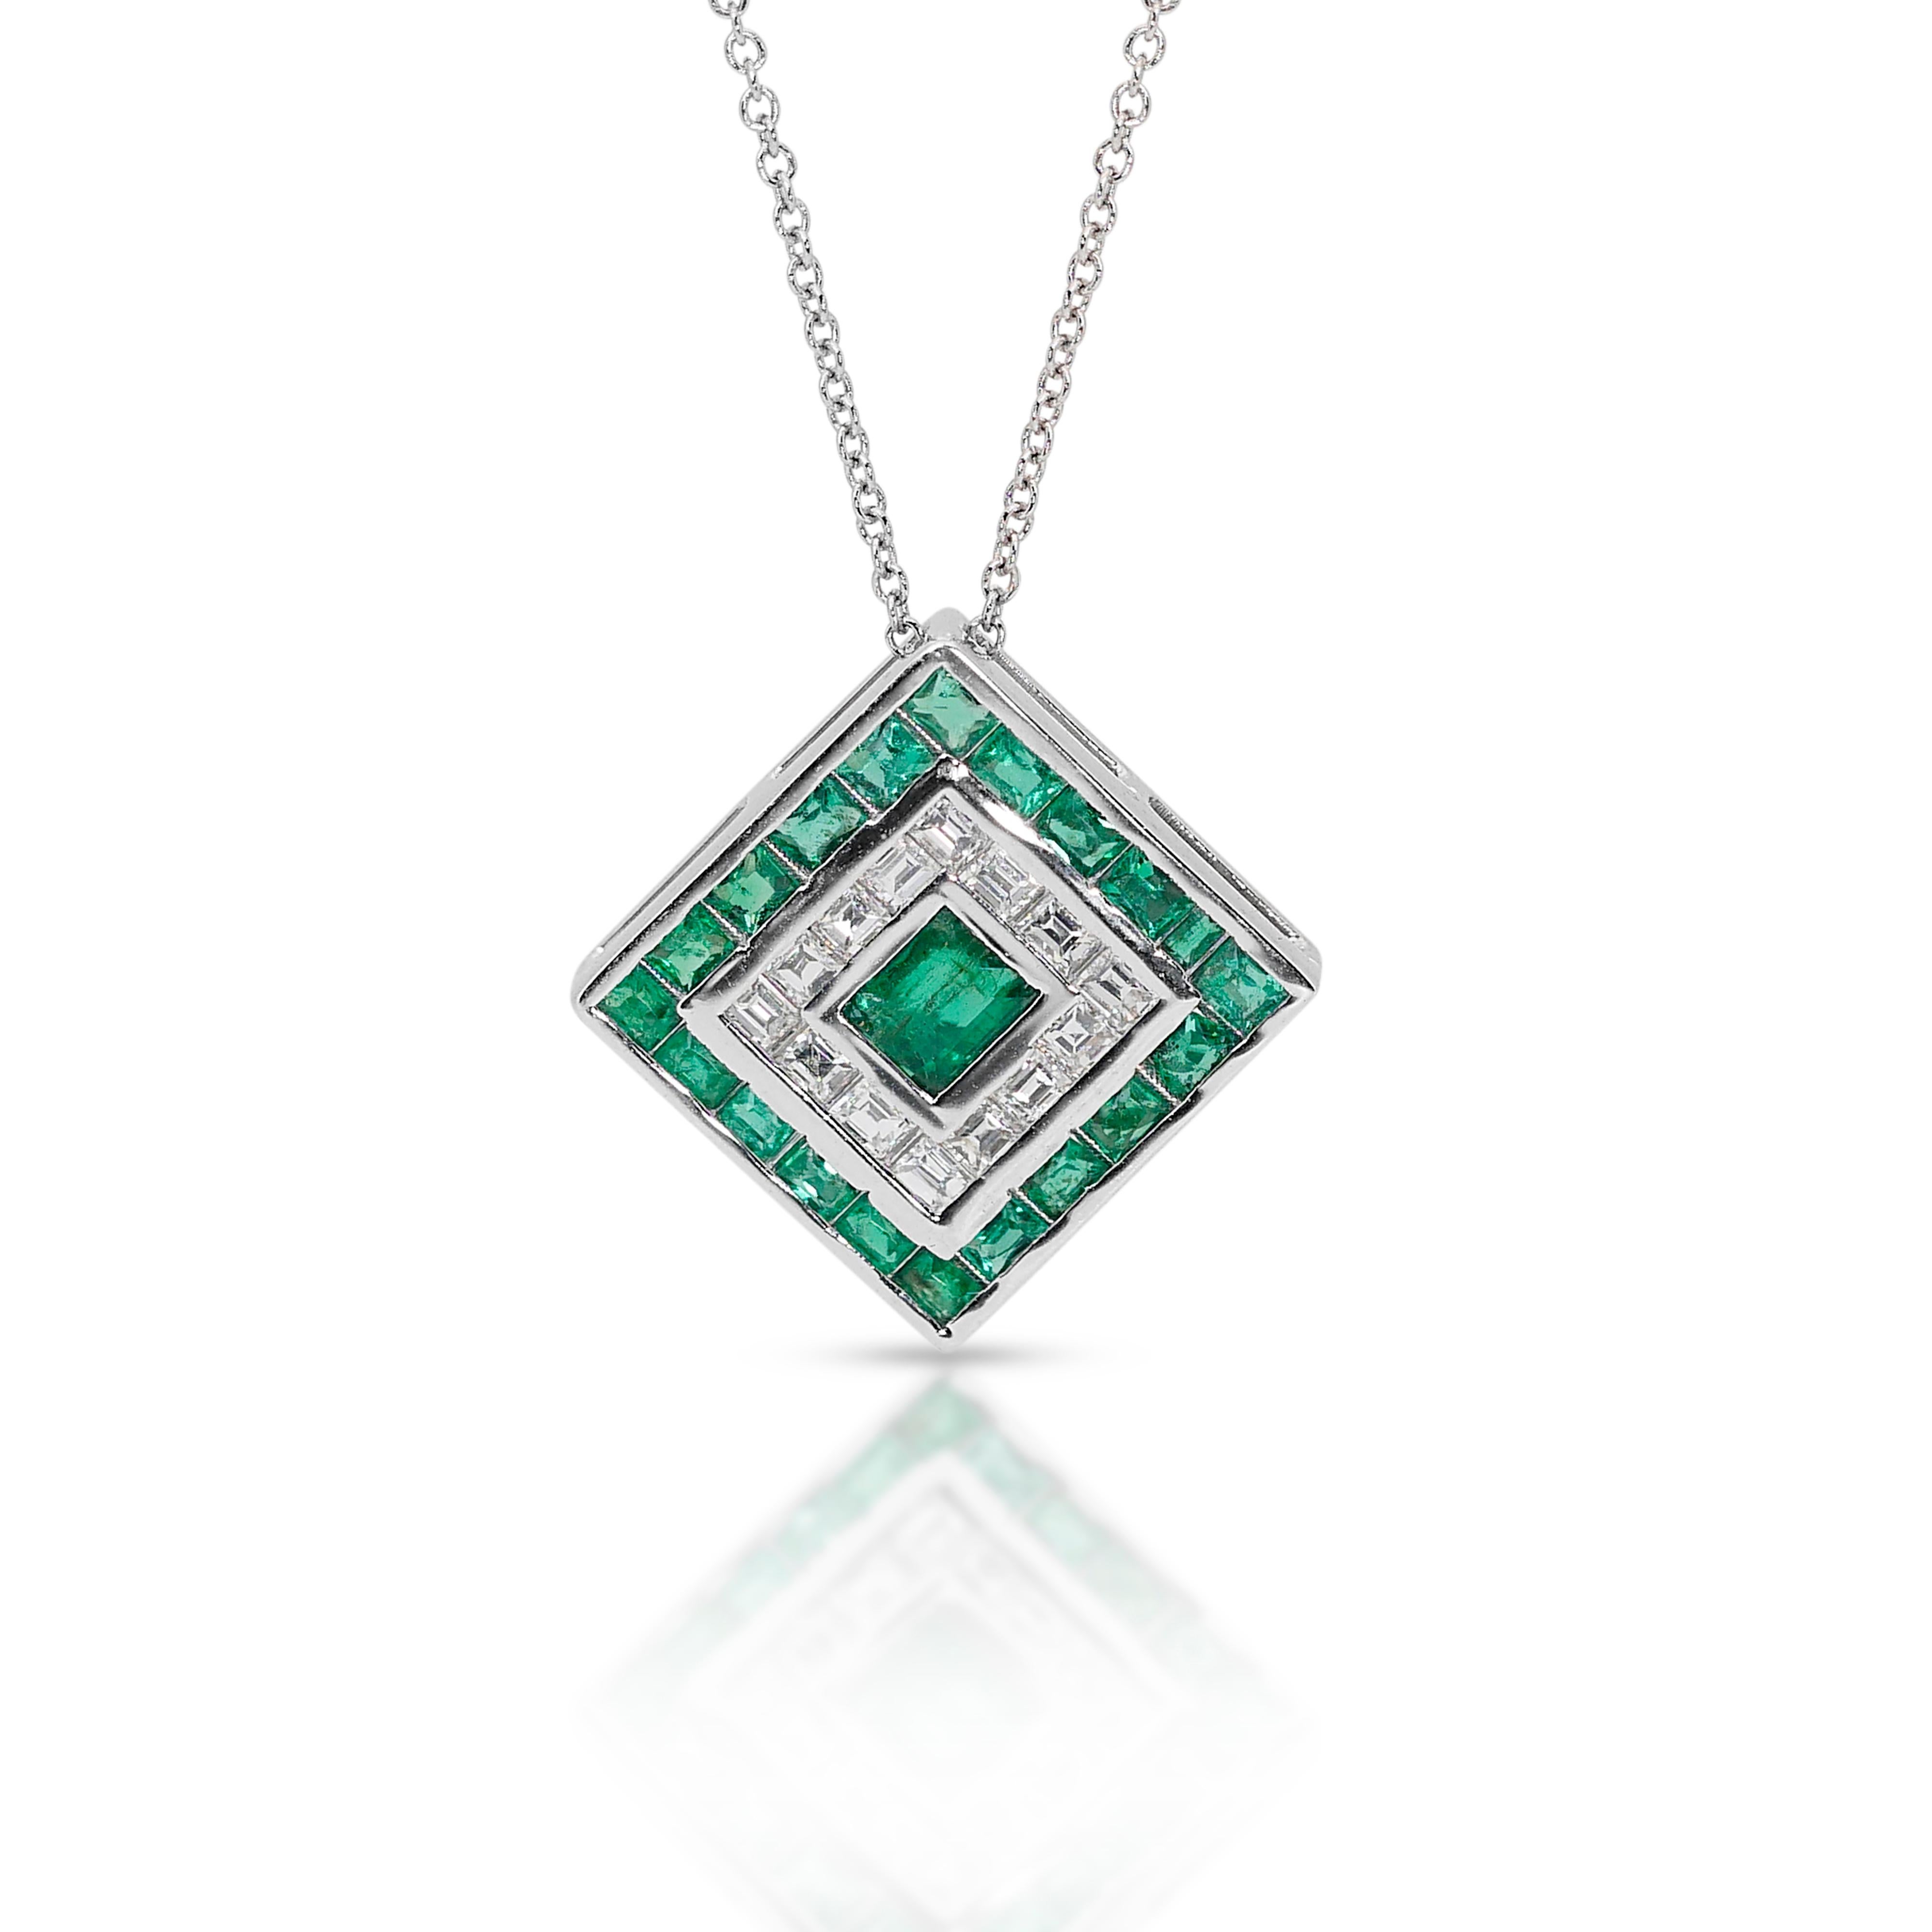 Captivating 1.45ct Emeralds and Diamonds Halo Necklace in 14k White Gold - IGI  For Sale 2